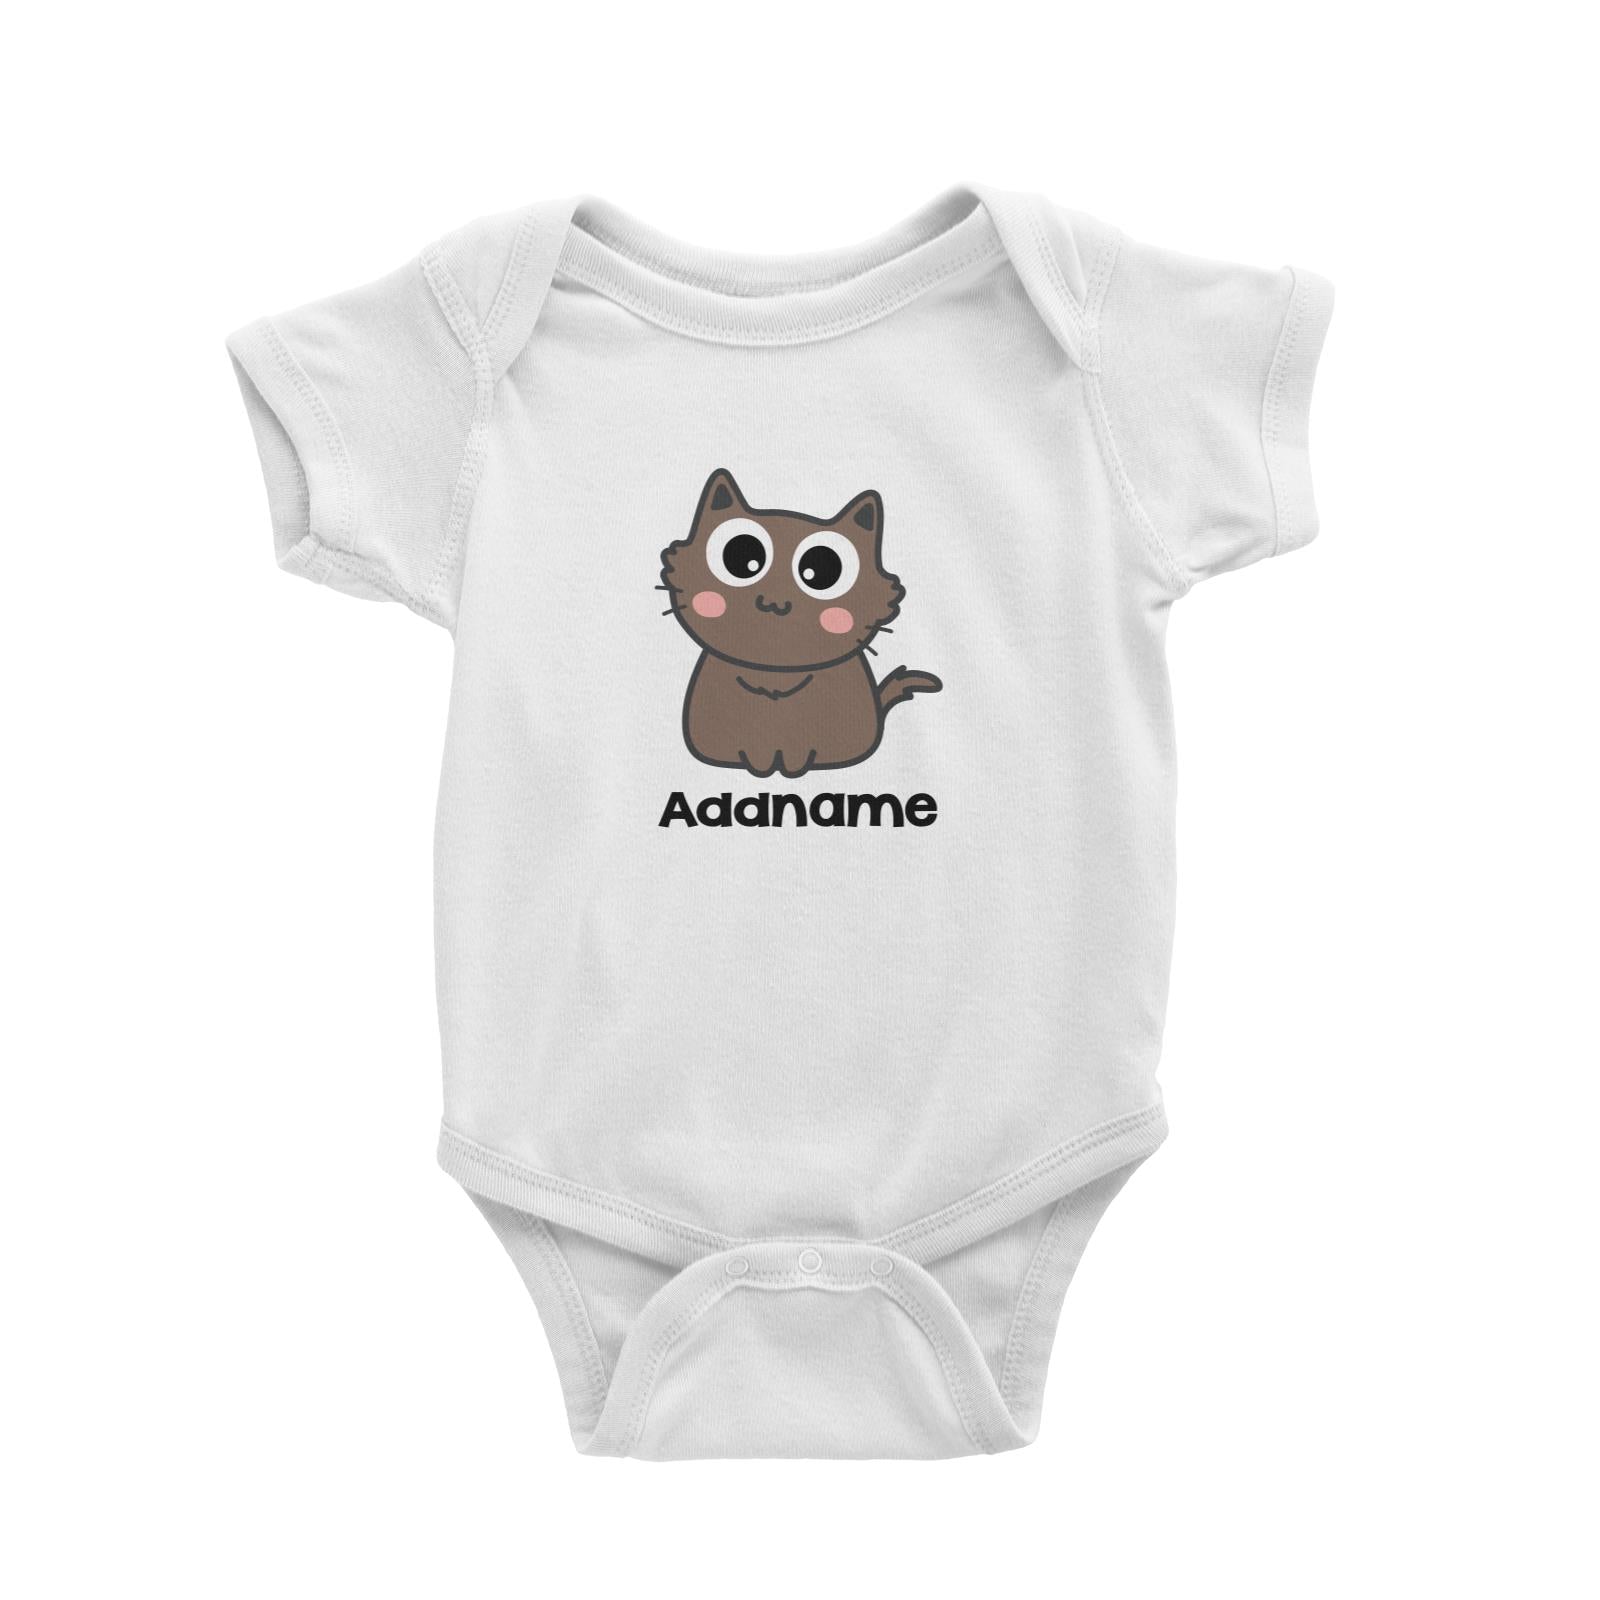 Drawn Adorable Cats Chocolate Addname Baby Romper